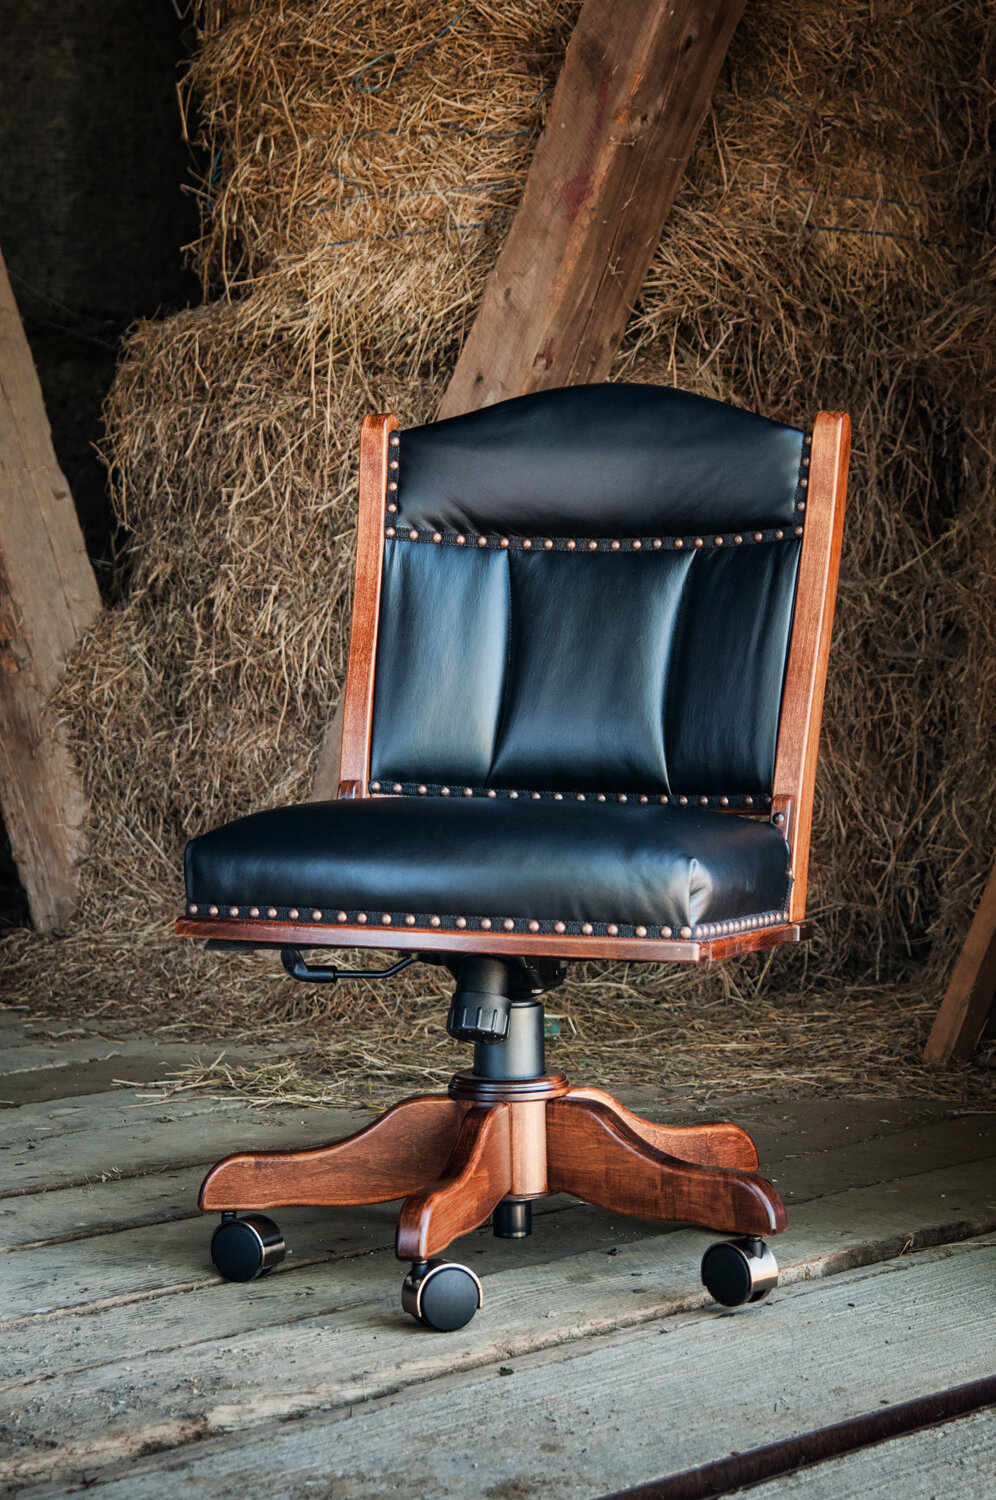 Oswego Executive Office Chair - Countryside Amish Furniture